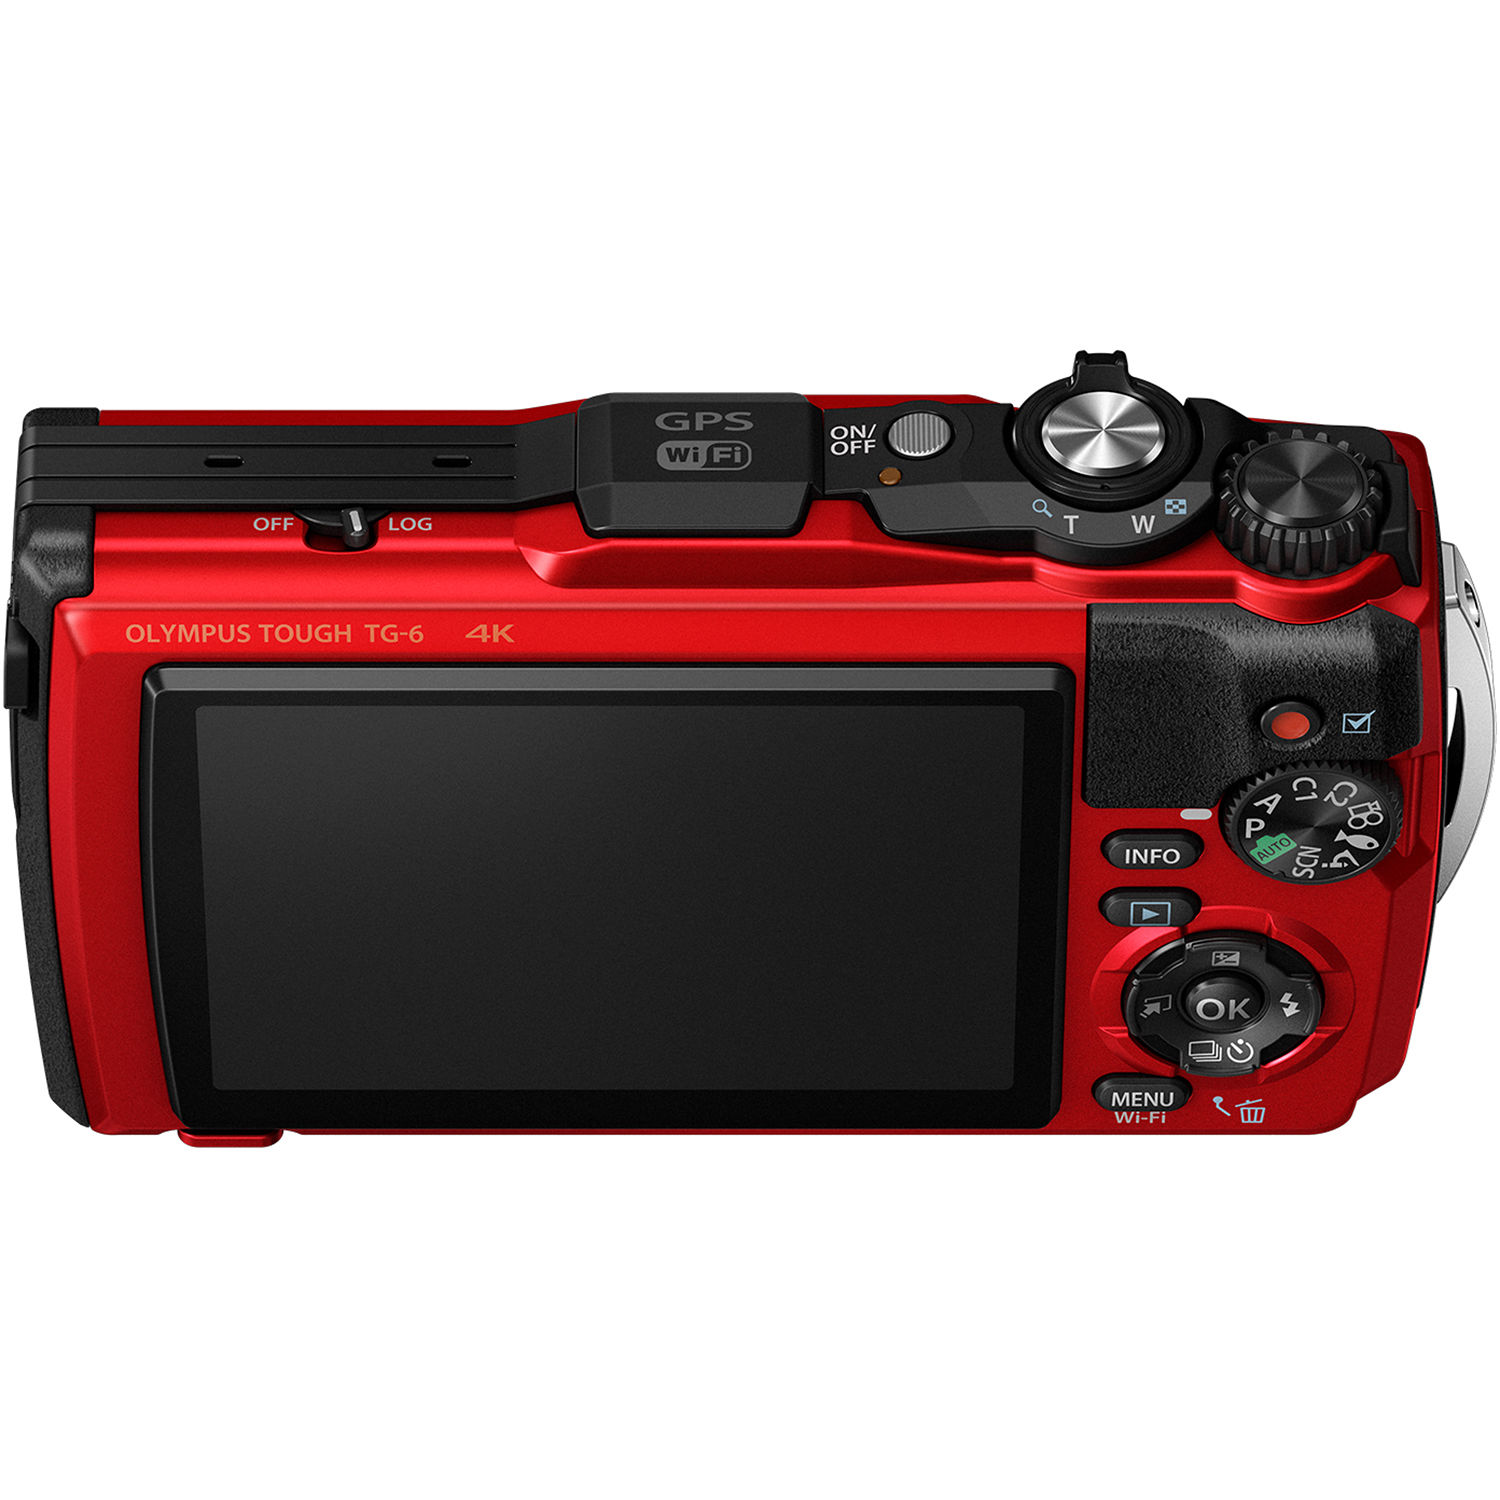 Olympus Tough TG-6 Waterproof Camera (Red) New - Wi-Fi with Extra  Batteries